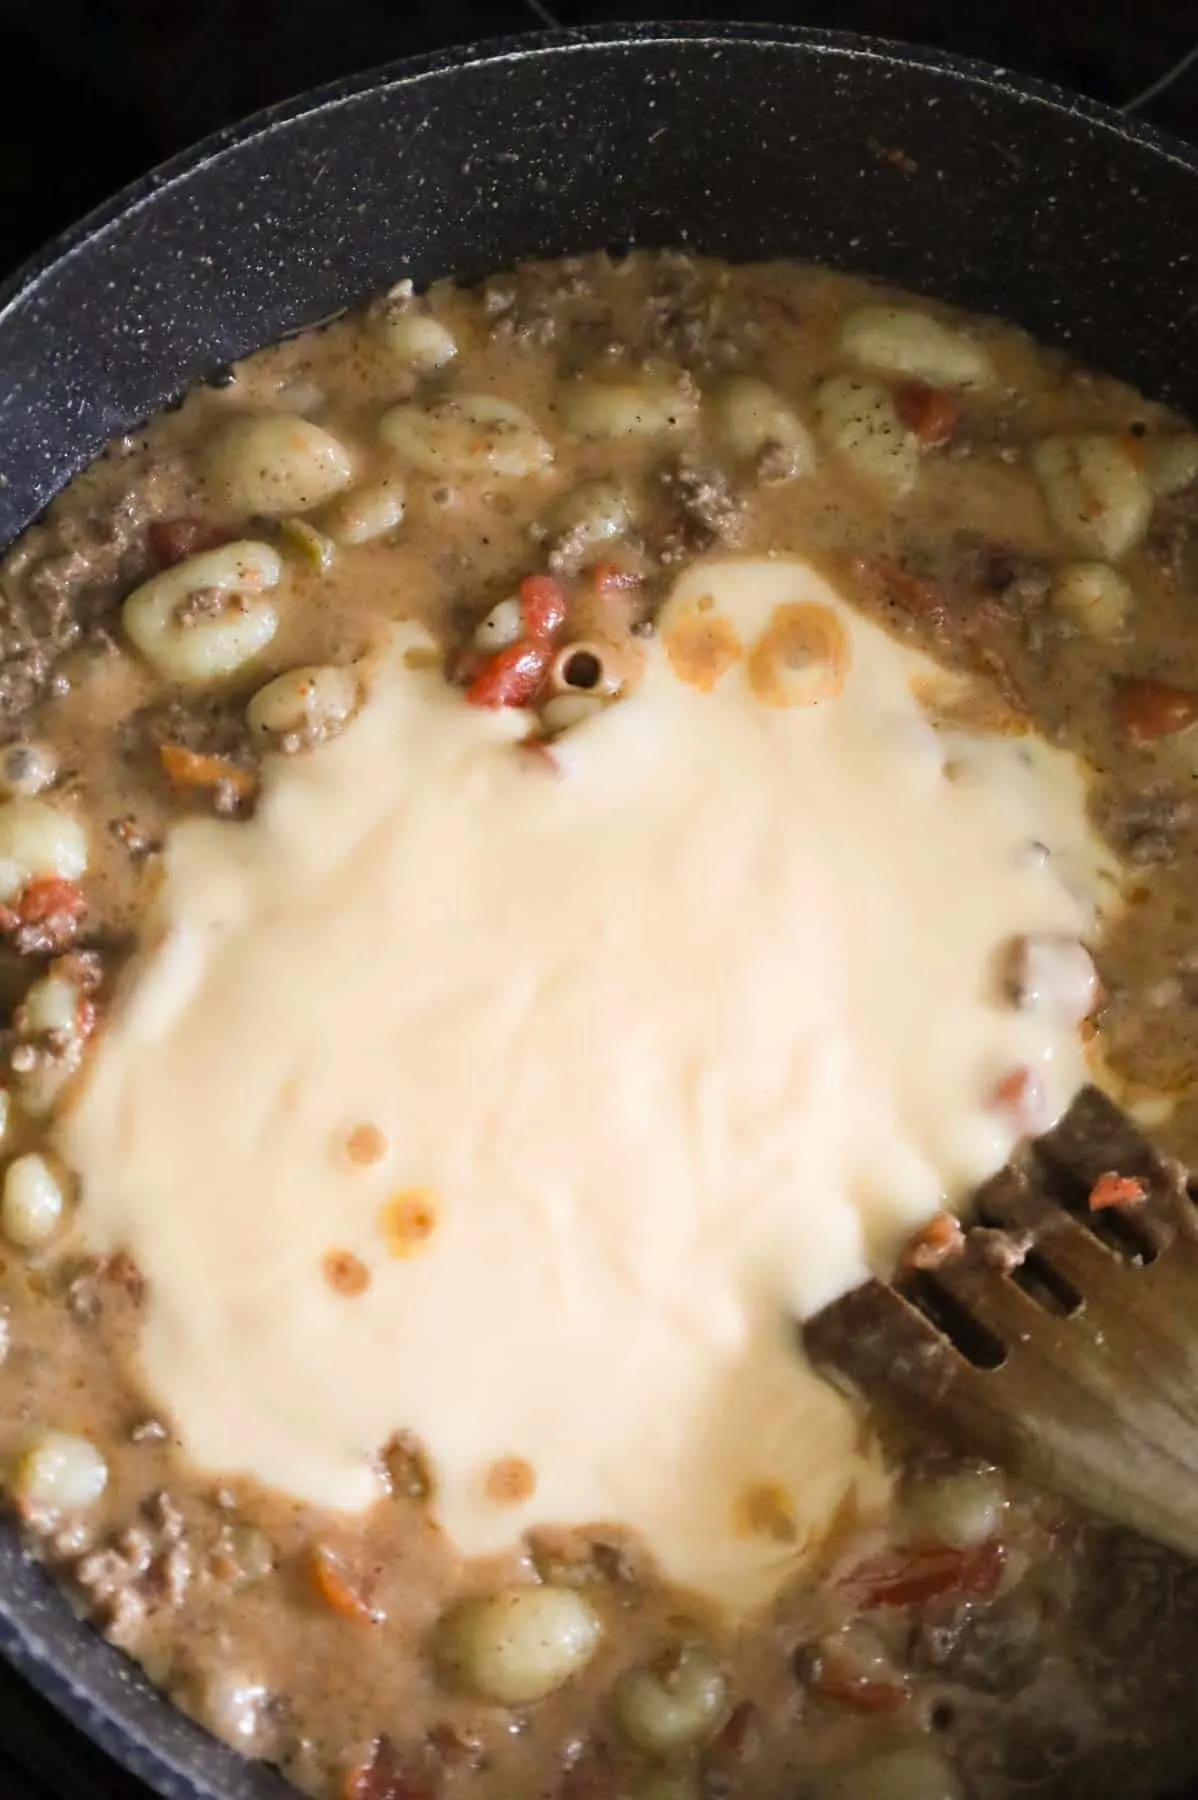 cheddar soup added to skillet with ground beef and gnocchi mixture